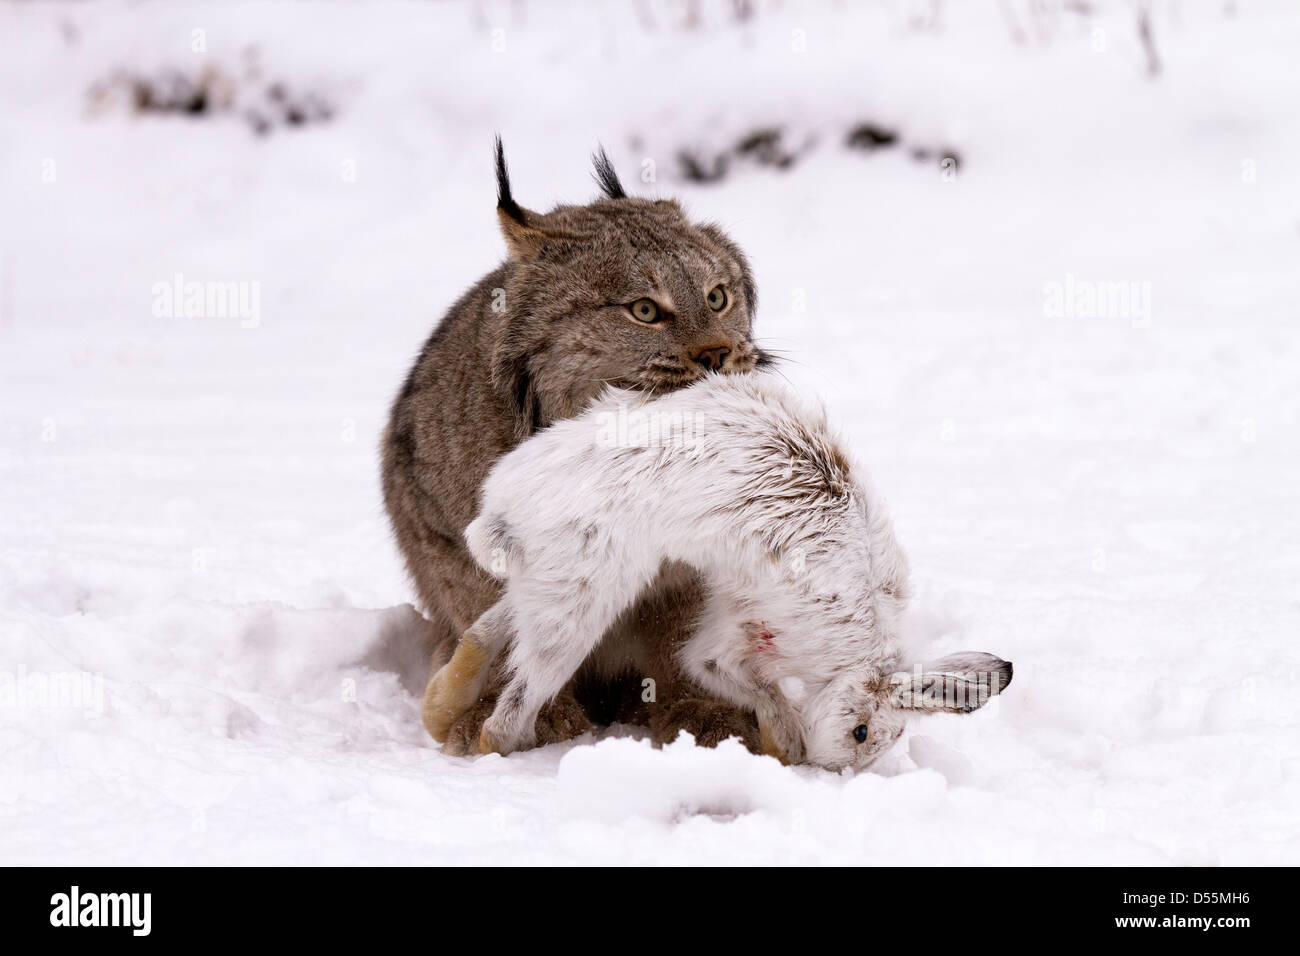 Canada Lynx, Lynx canadansis in snow, with Snowshoe Hare Stock Photo